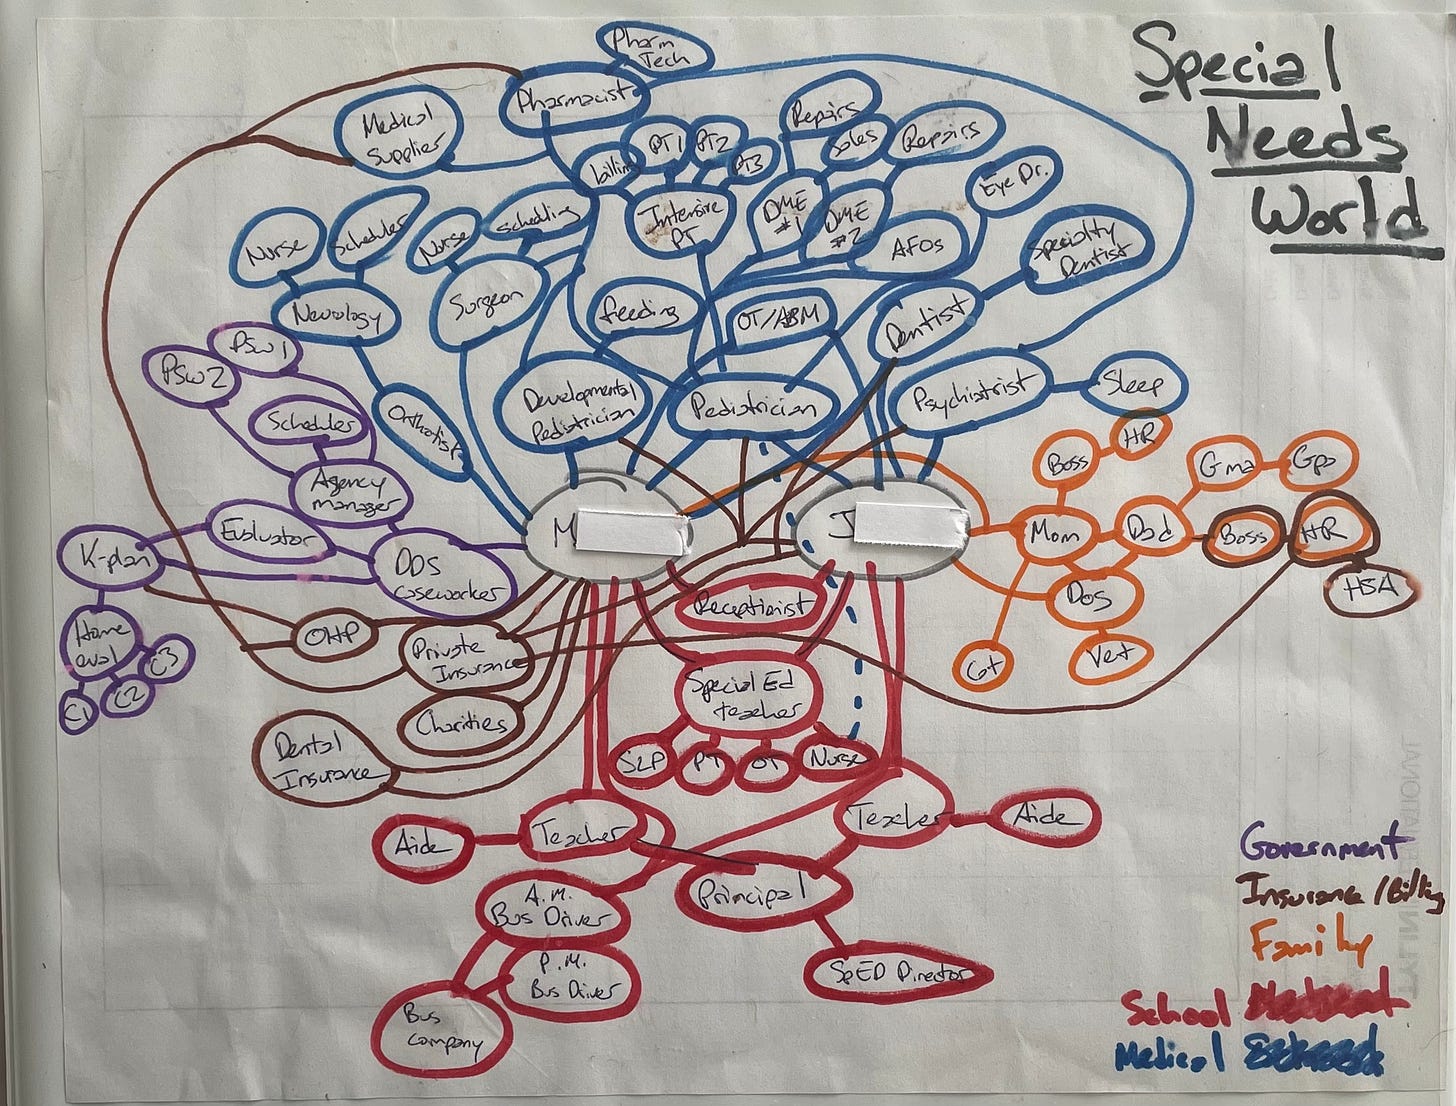 A hand-drawn bubble chart titled Special Needs World in blue, red, brown, purple and orange with the titles of various health, social work and school system professionals.